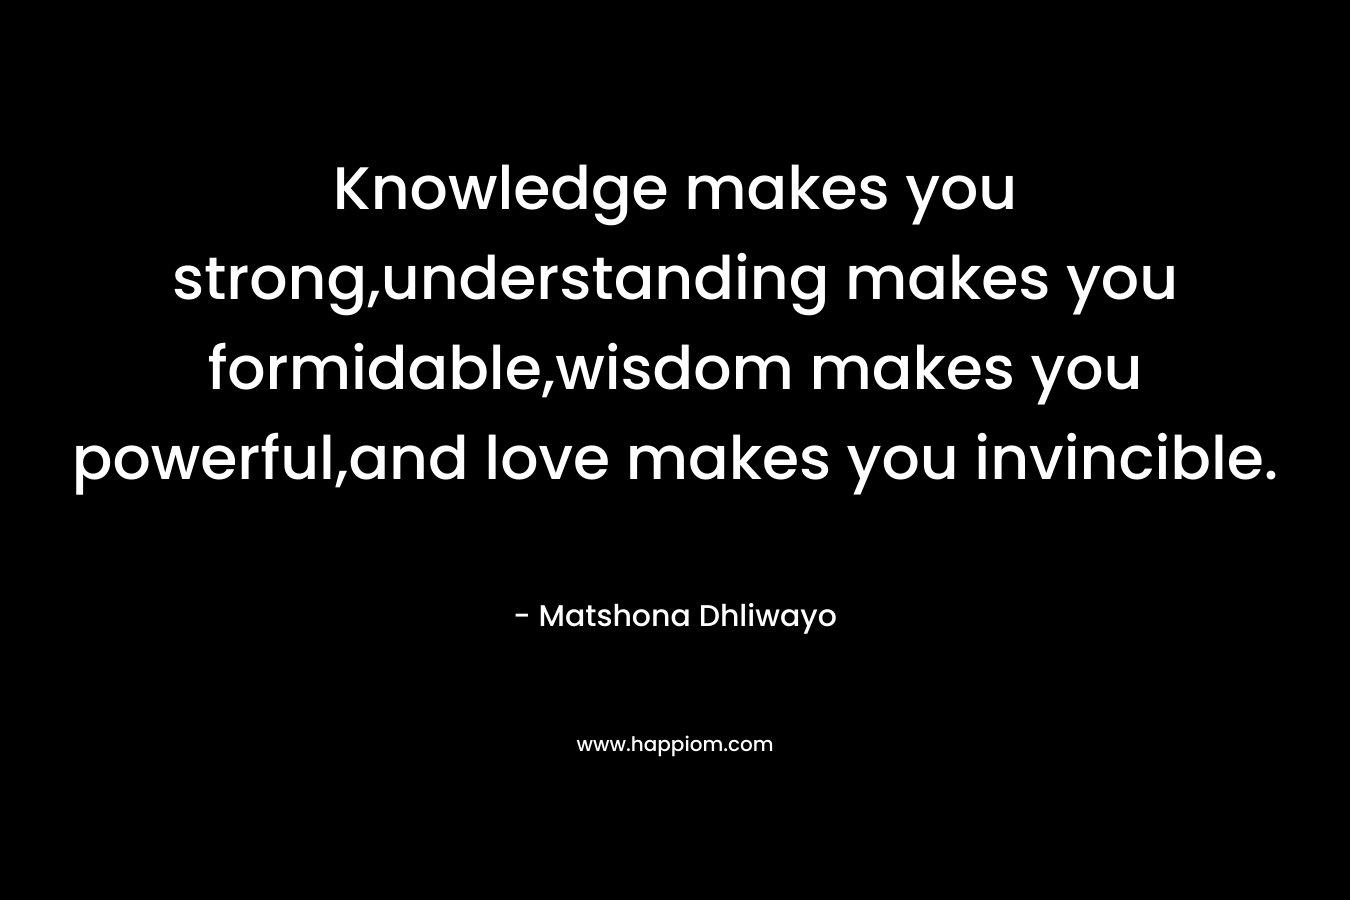 Knowledge makes you strong,understanding makes you formidable,wisdom makes you powerful,and love makes you invincible. – Matshona Dhliwayo